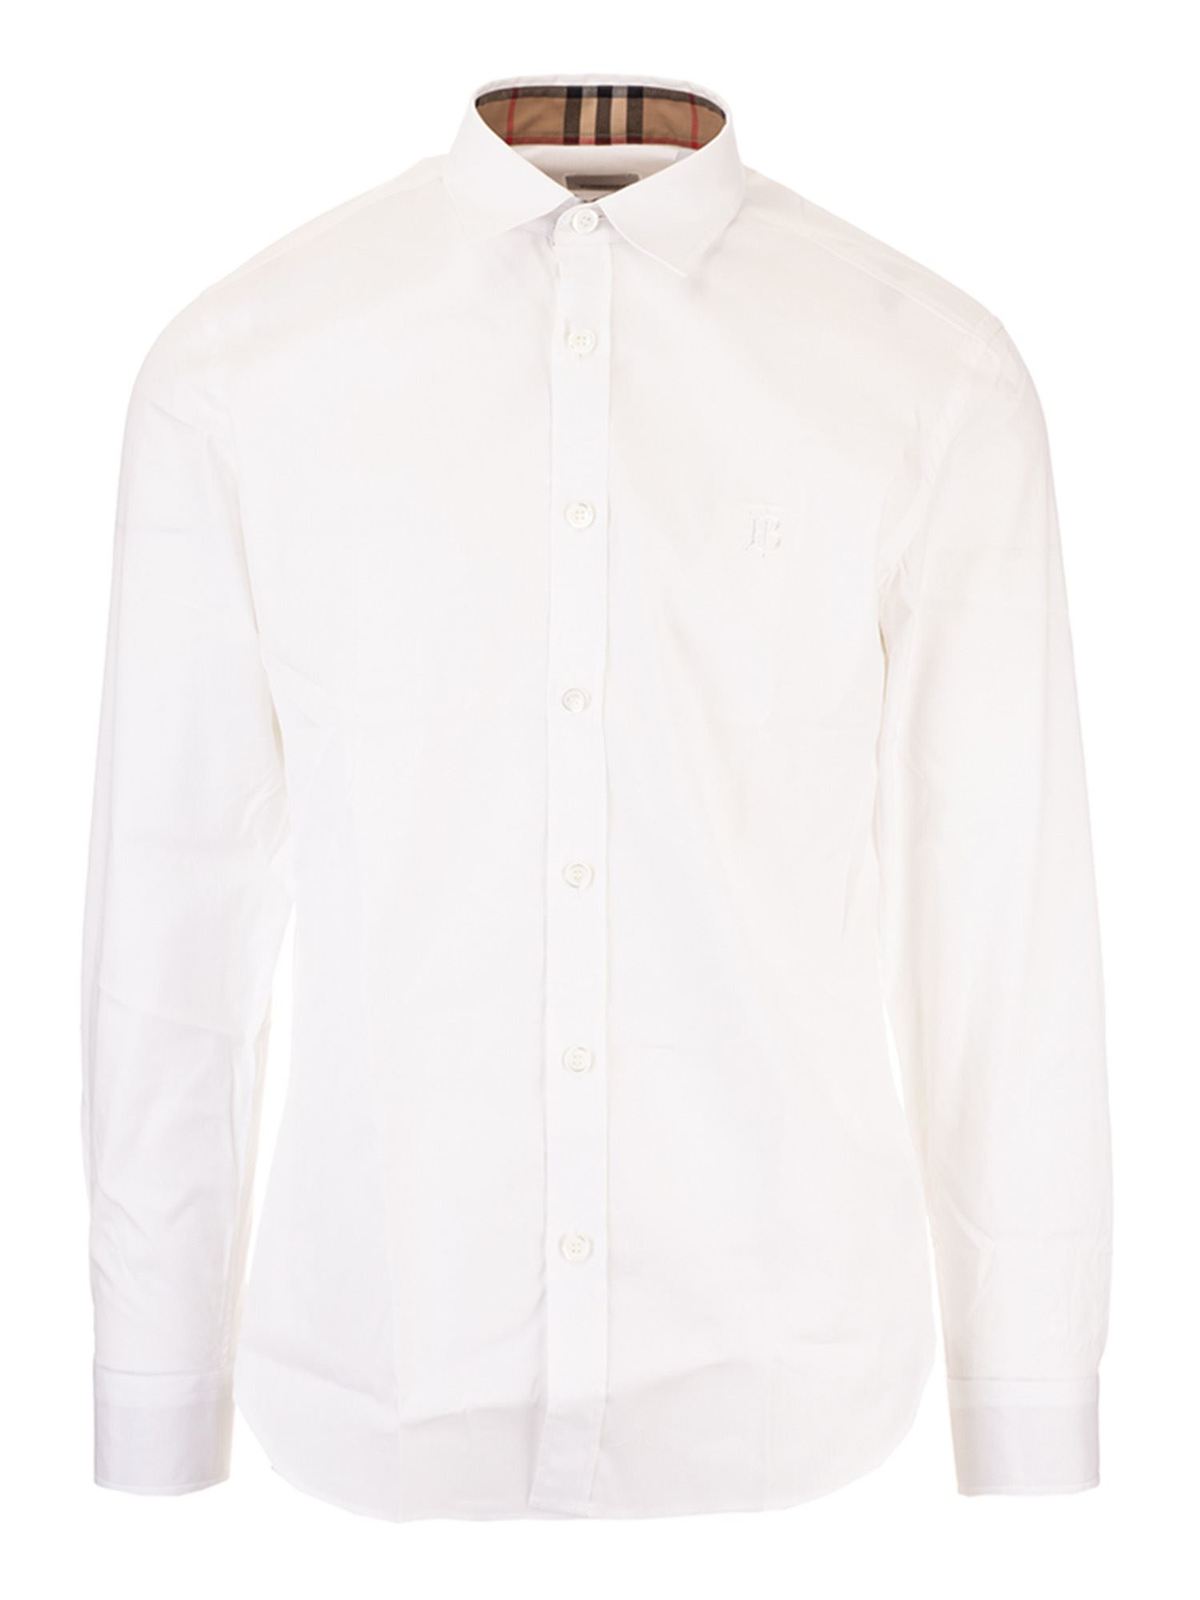 Burberry - Shirt with monogram - shirts - 8032308 | Shop online at iKRIX